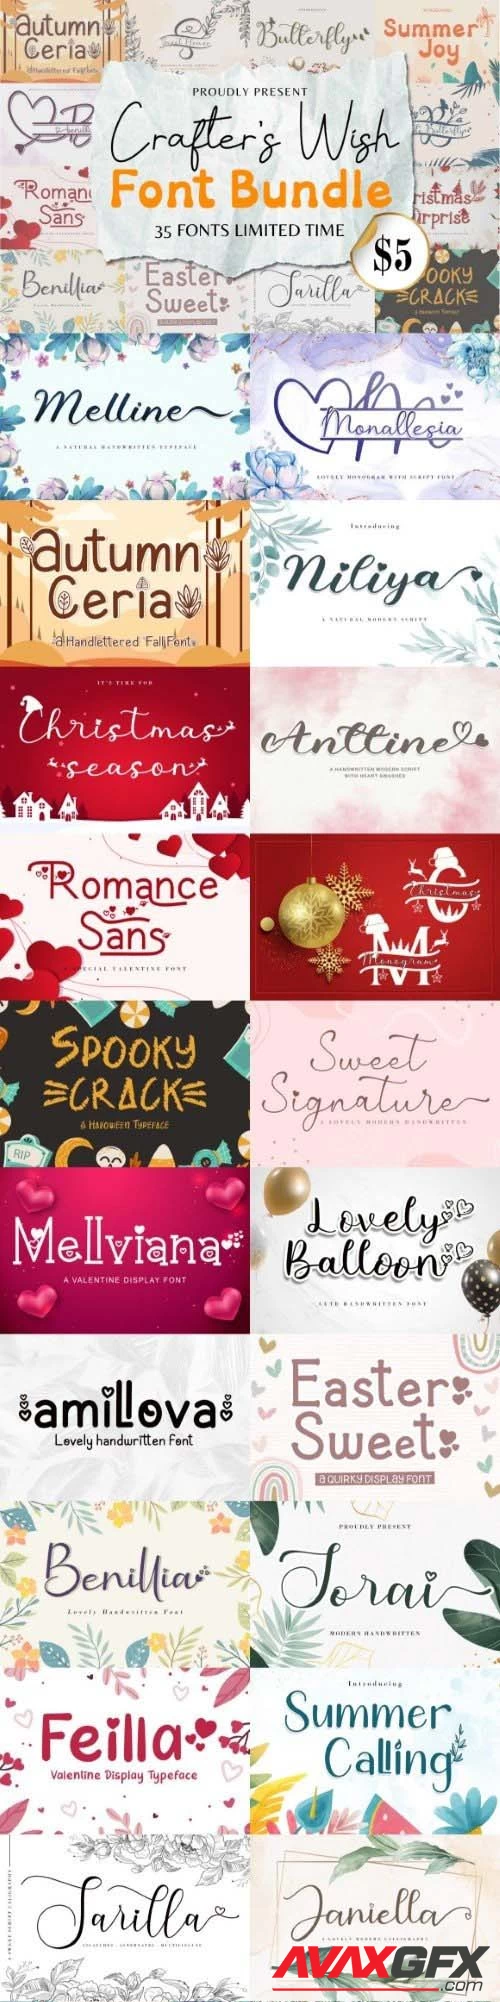 Crafter's Wish Font Bundle